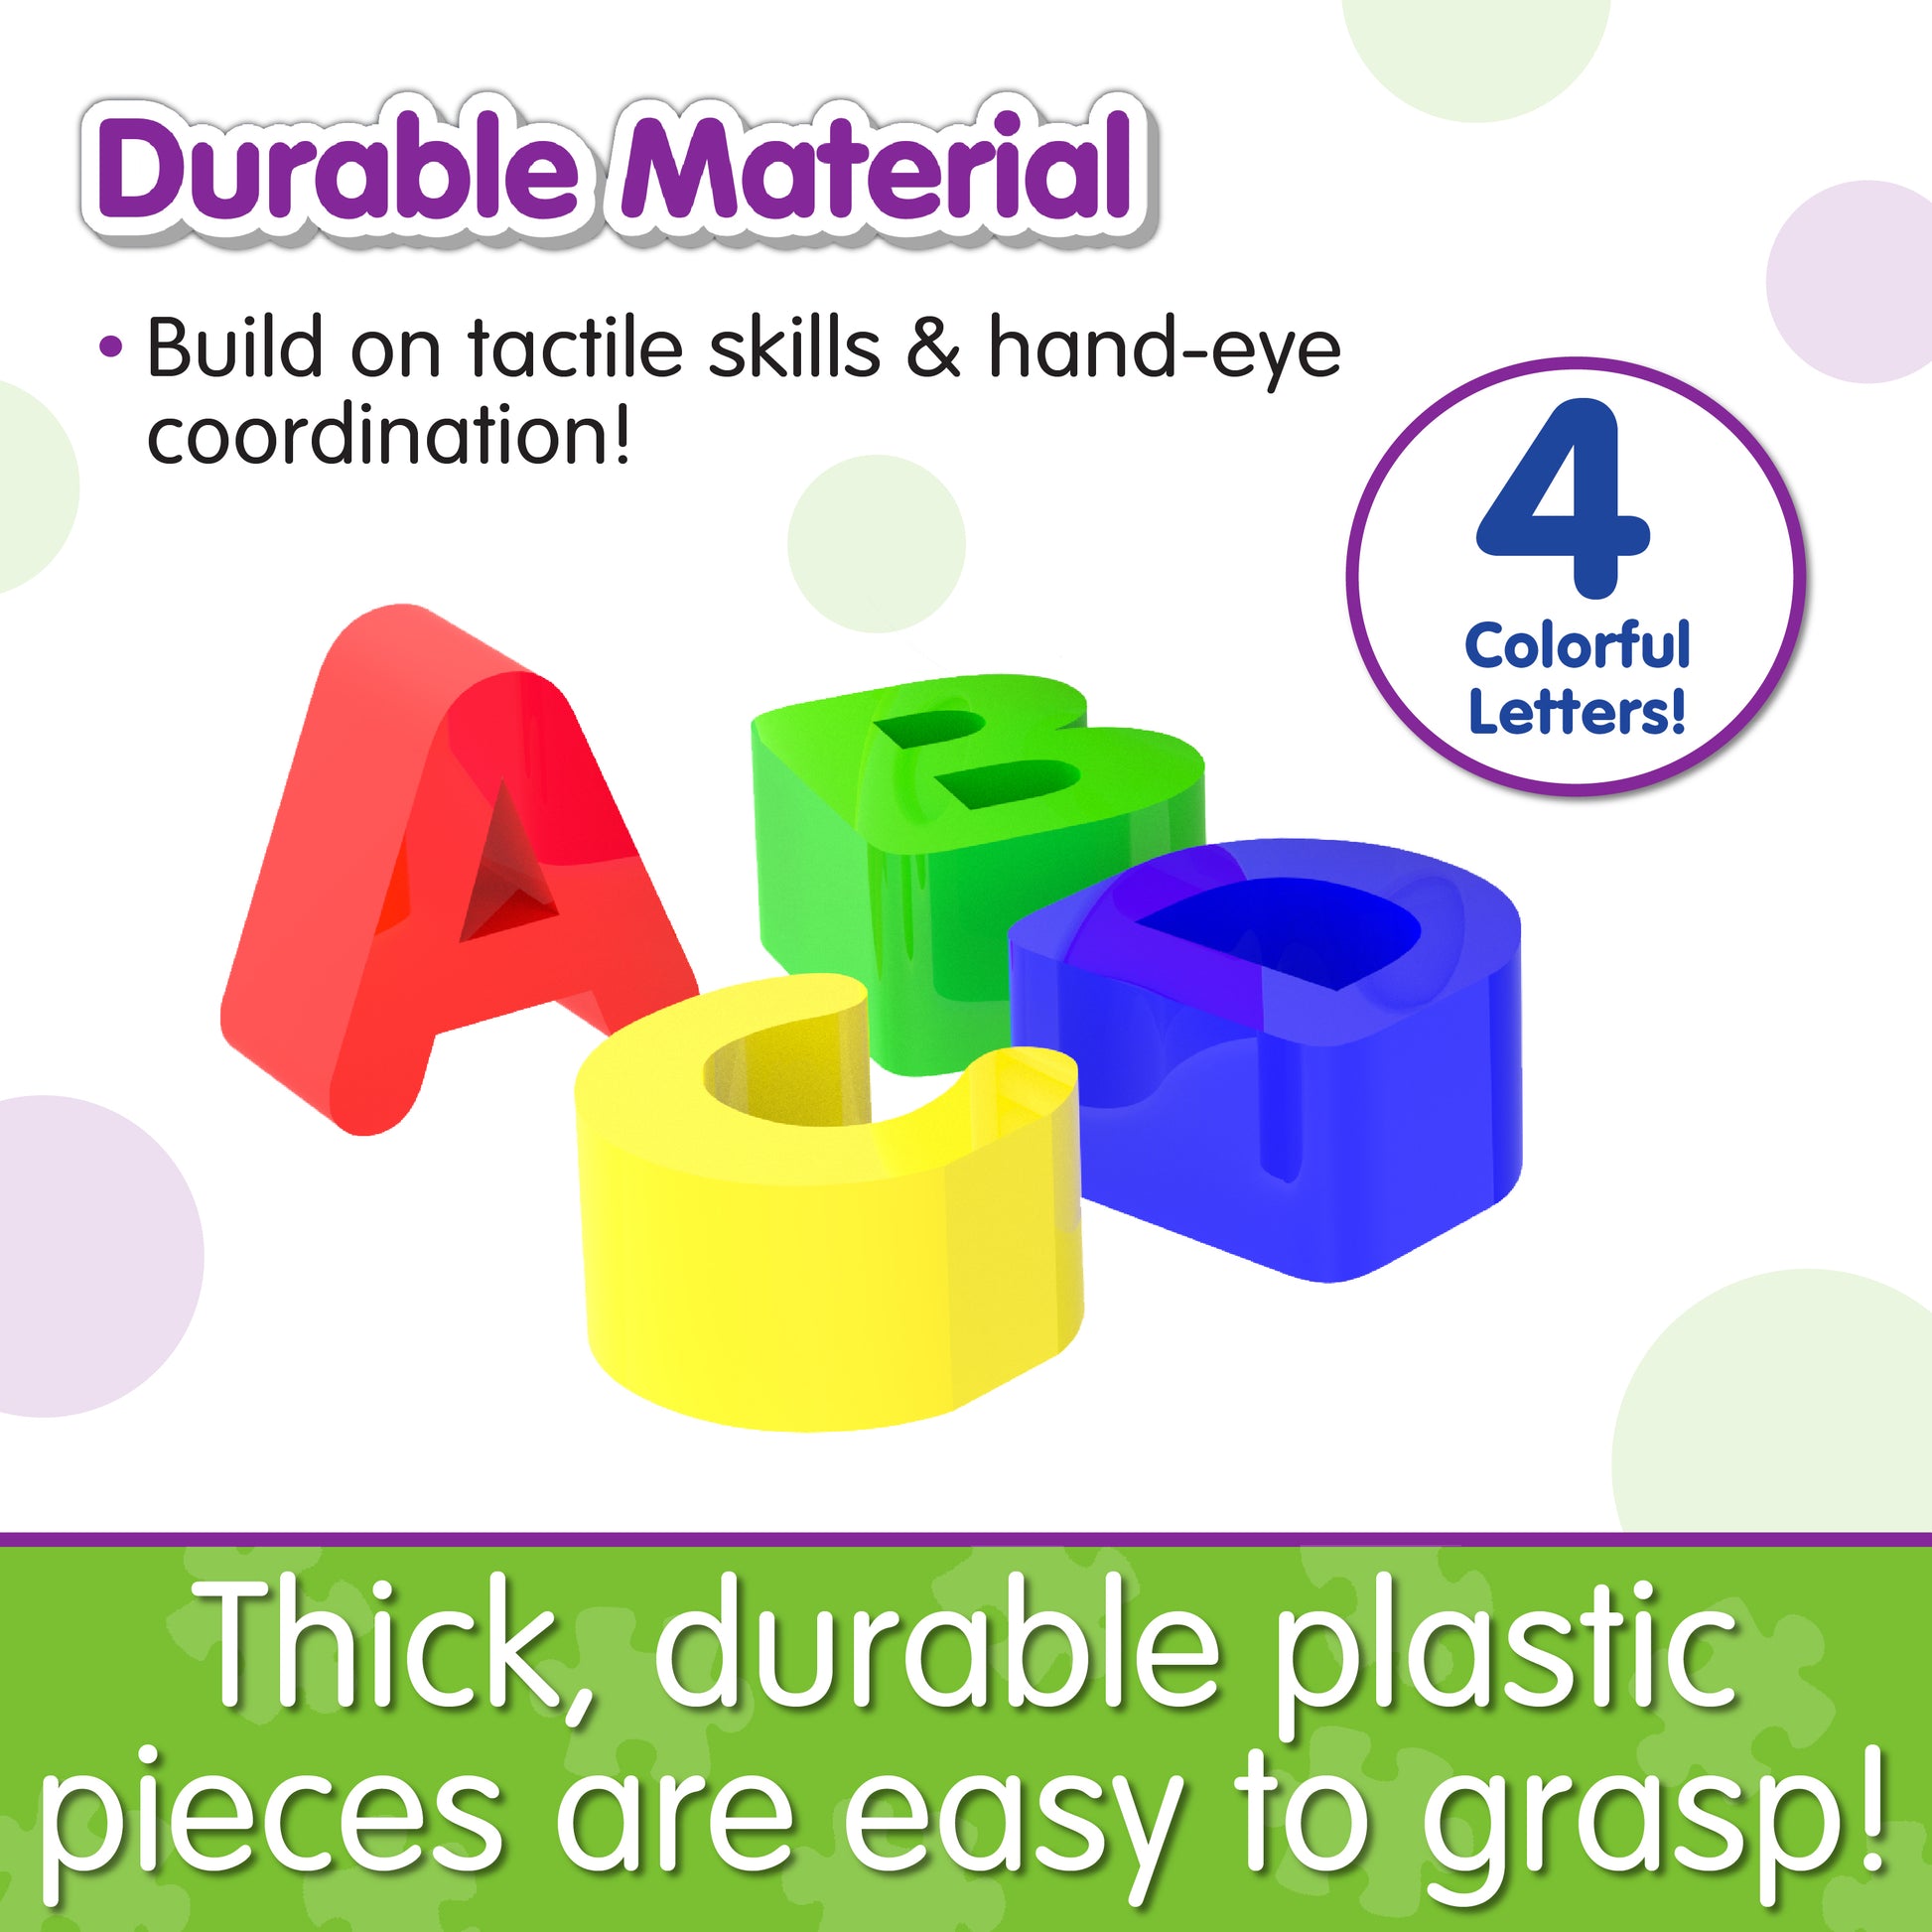 Infographic about Letterland School Bus's durable material that says, "Thick, durable plastic pieces are easy to grasp!"